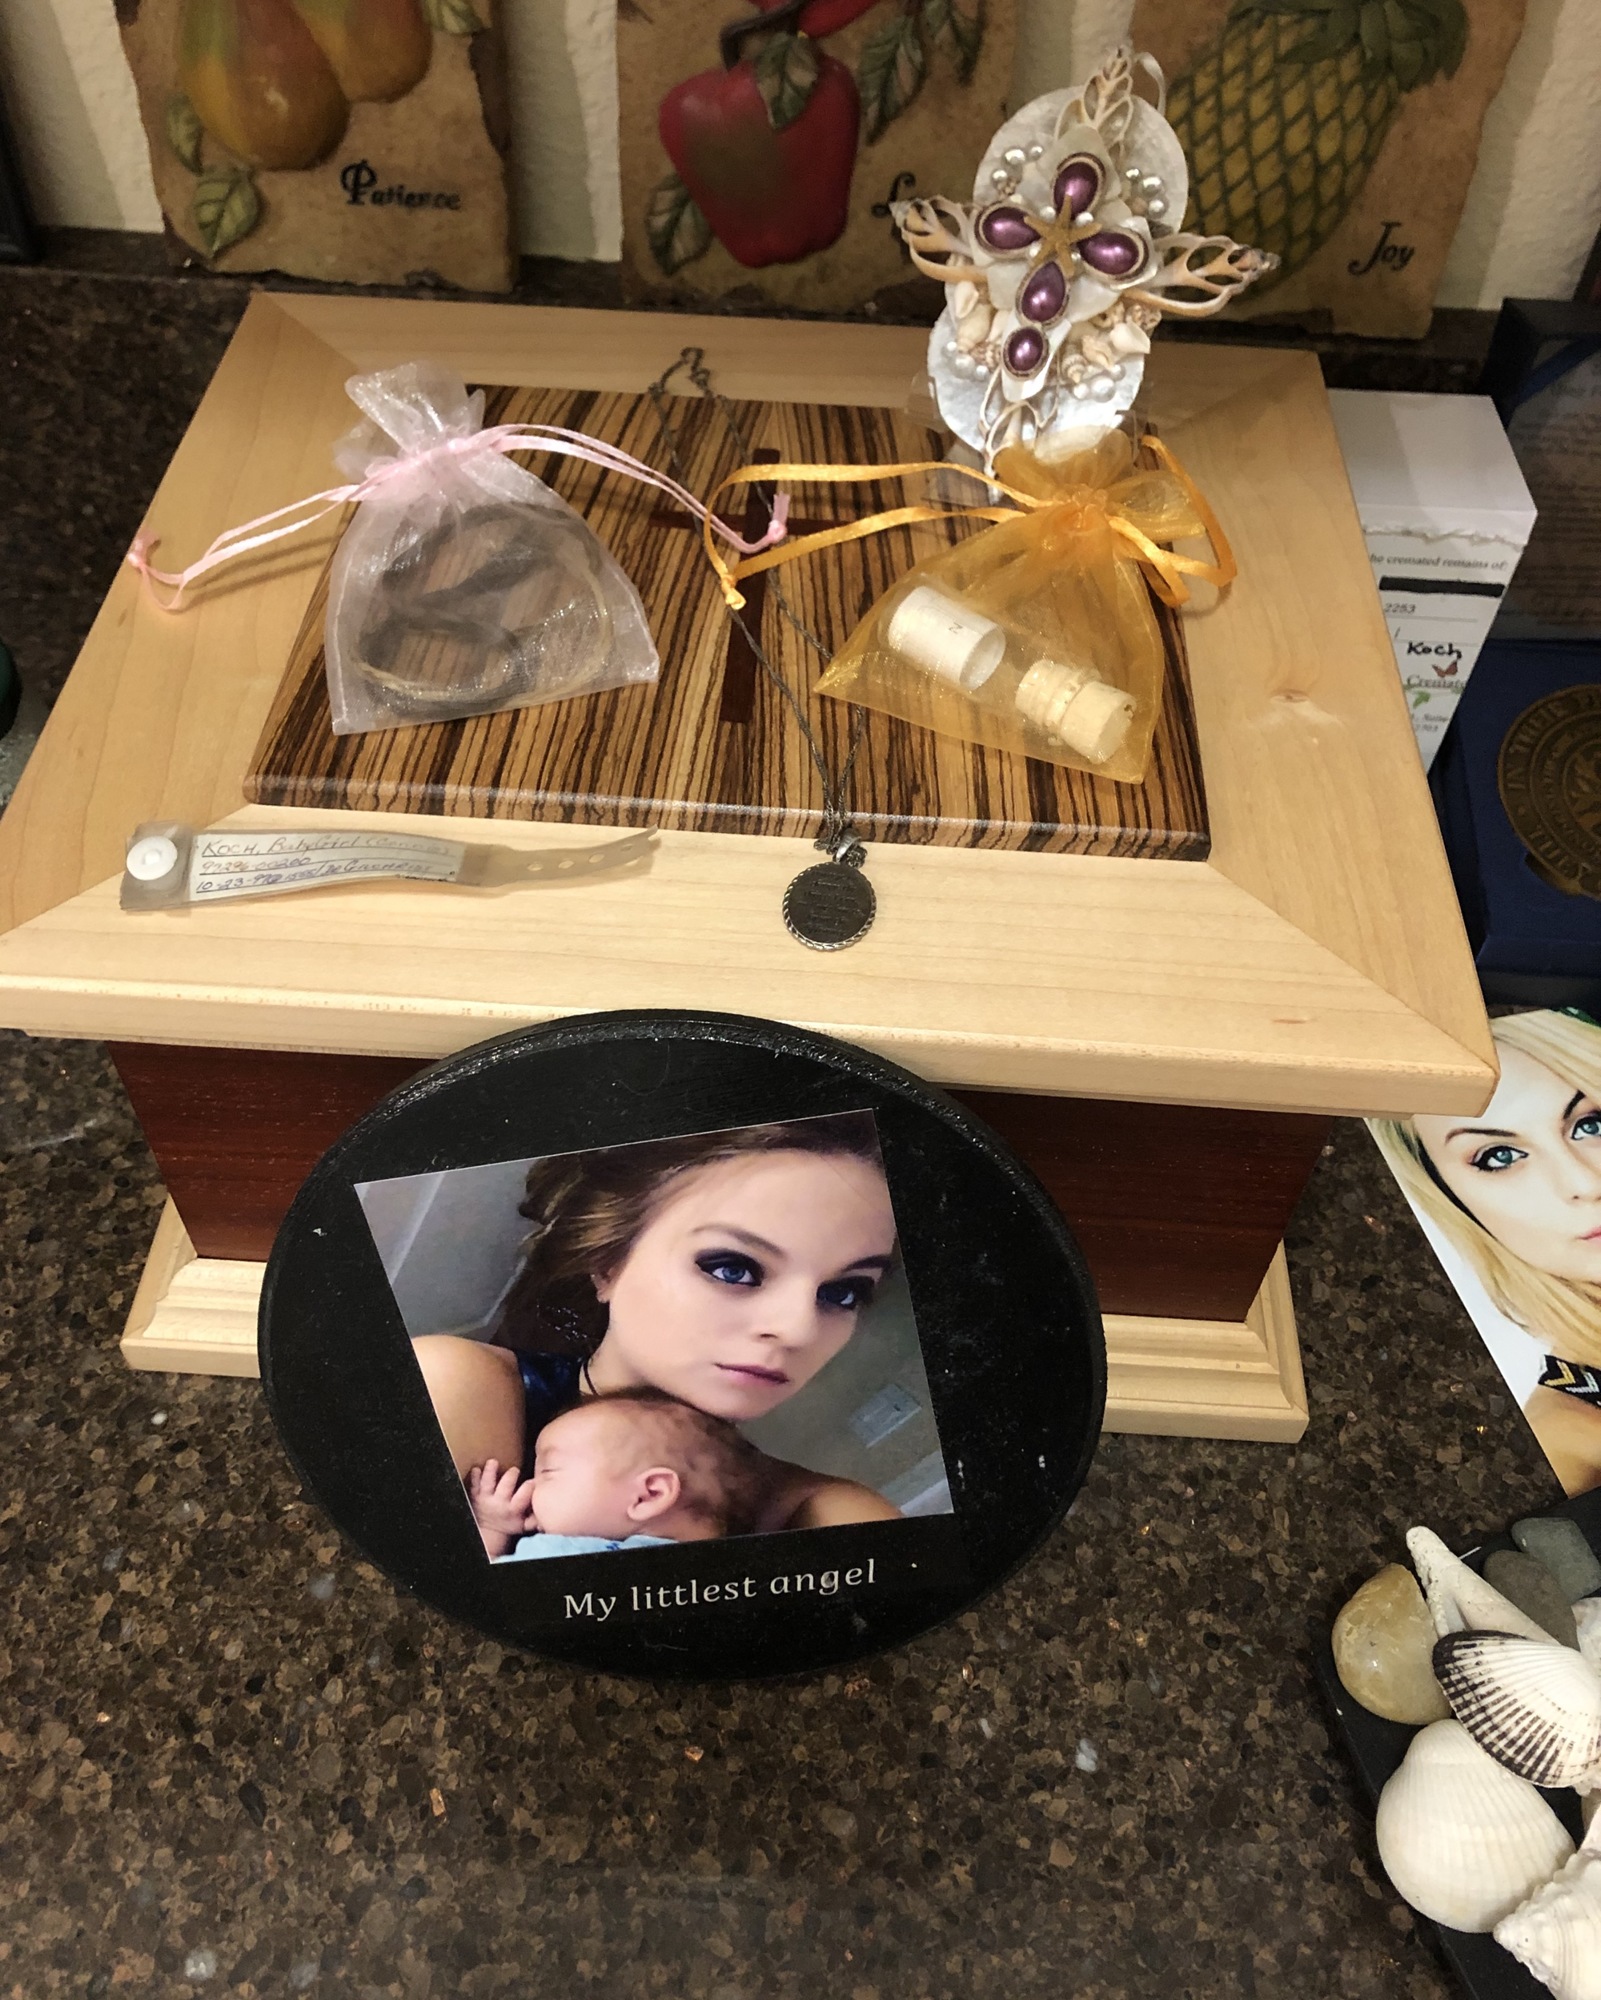 The Koch family has many mementos of their daughter, Lyndsey, including a small braid of her hair and a vial containing a printout of her heartbeat.